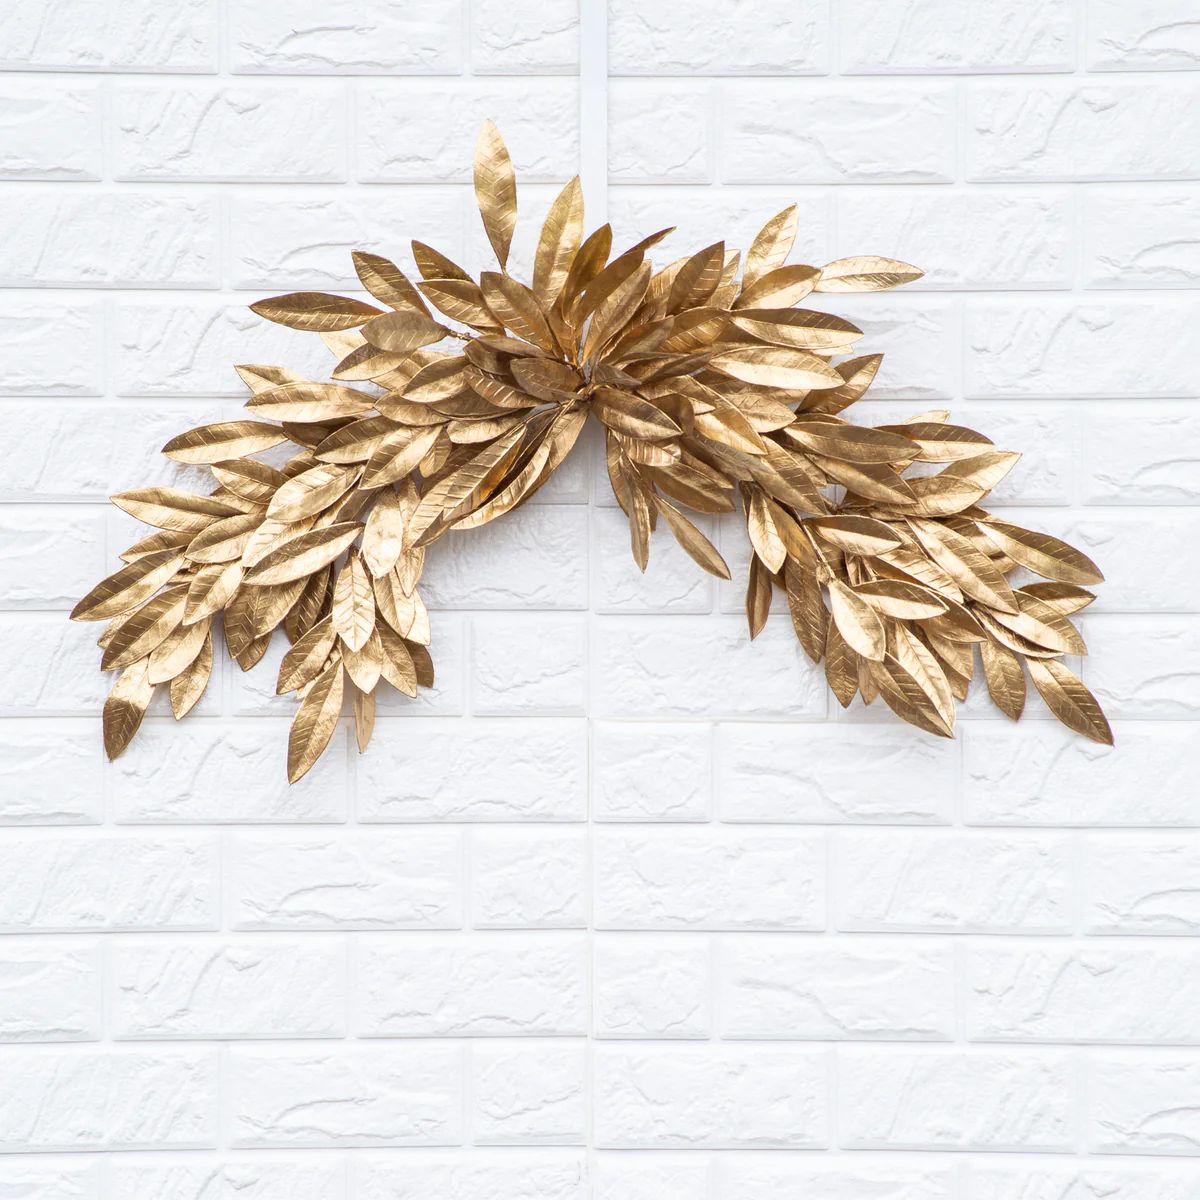 Antiqued Gold Bay Leaf Christmas Holiday Mantel Swag | Darby Creek Trading